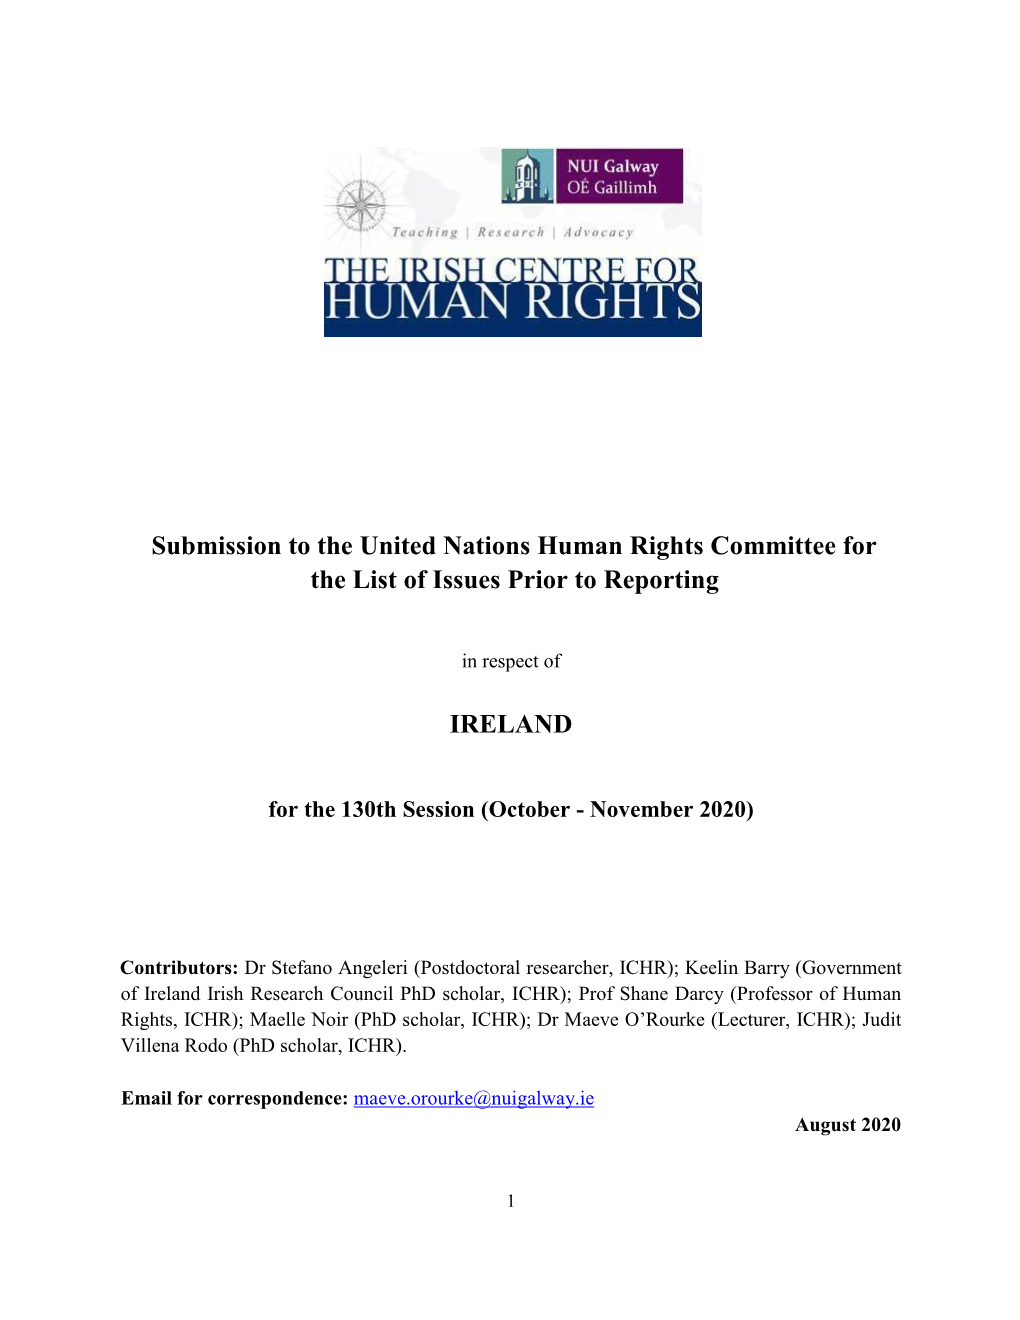 Submission to the United Nations Human Rights Committee for the List of Issues Prior to Reporting IRELAND